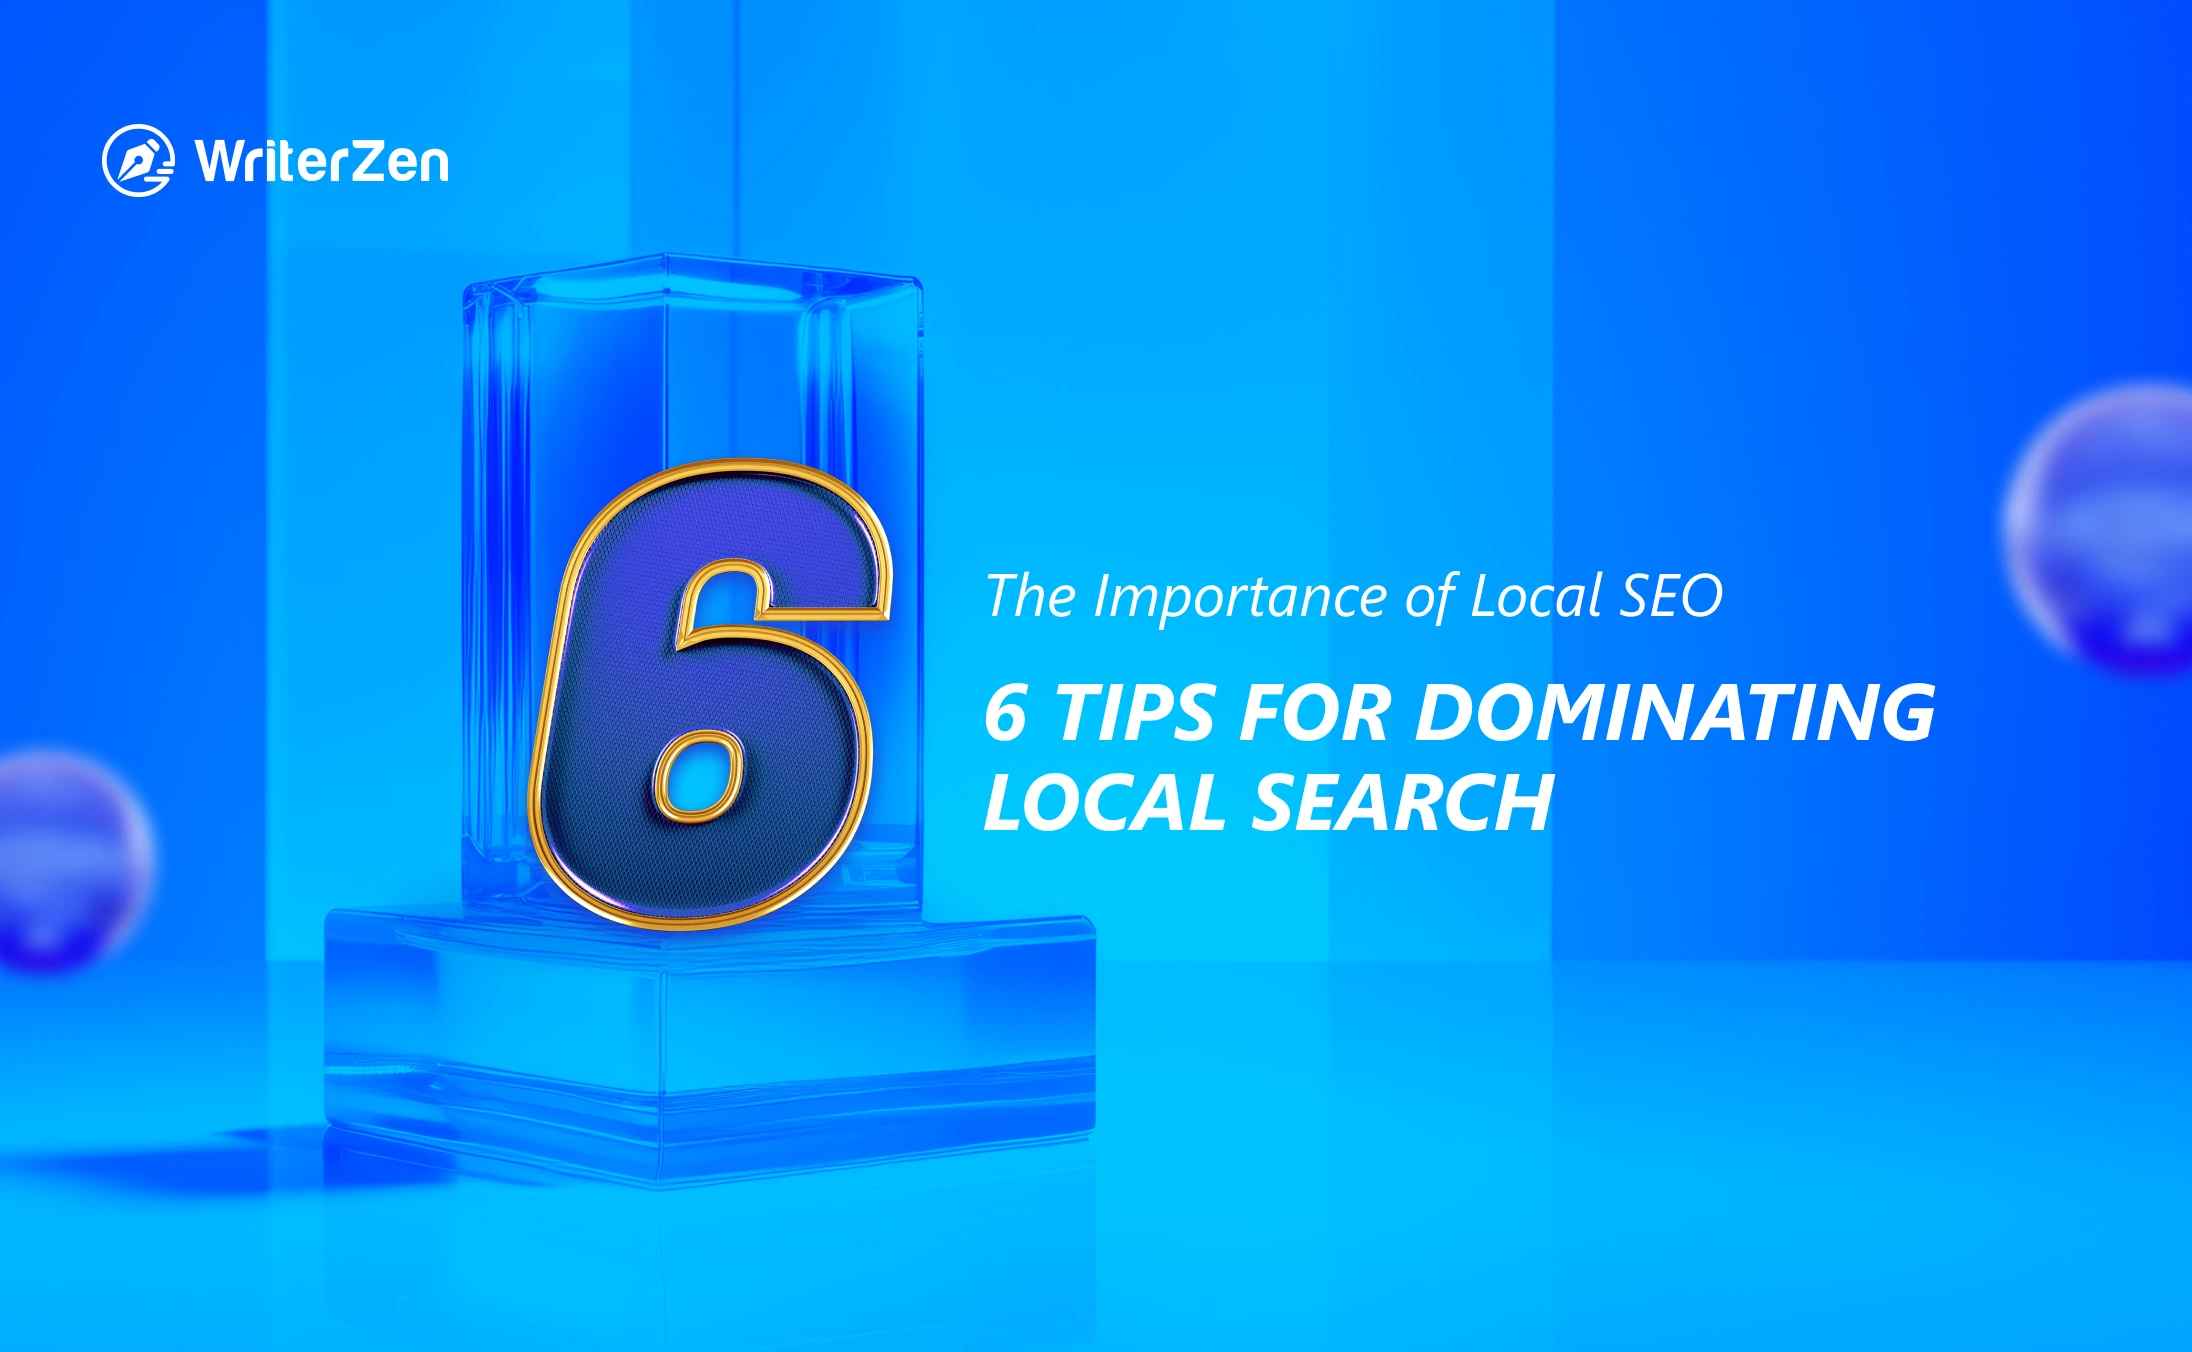 The Importance of Local SEO: 6 Tips for Dominating Local Search